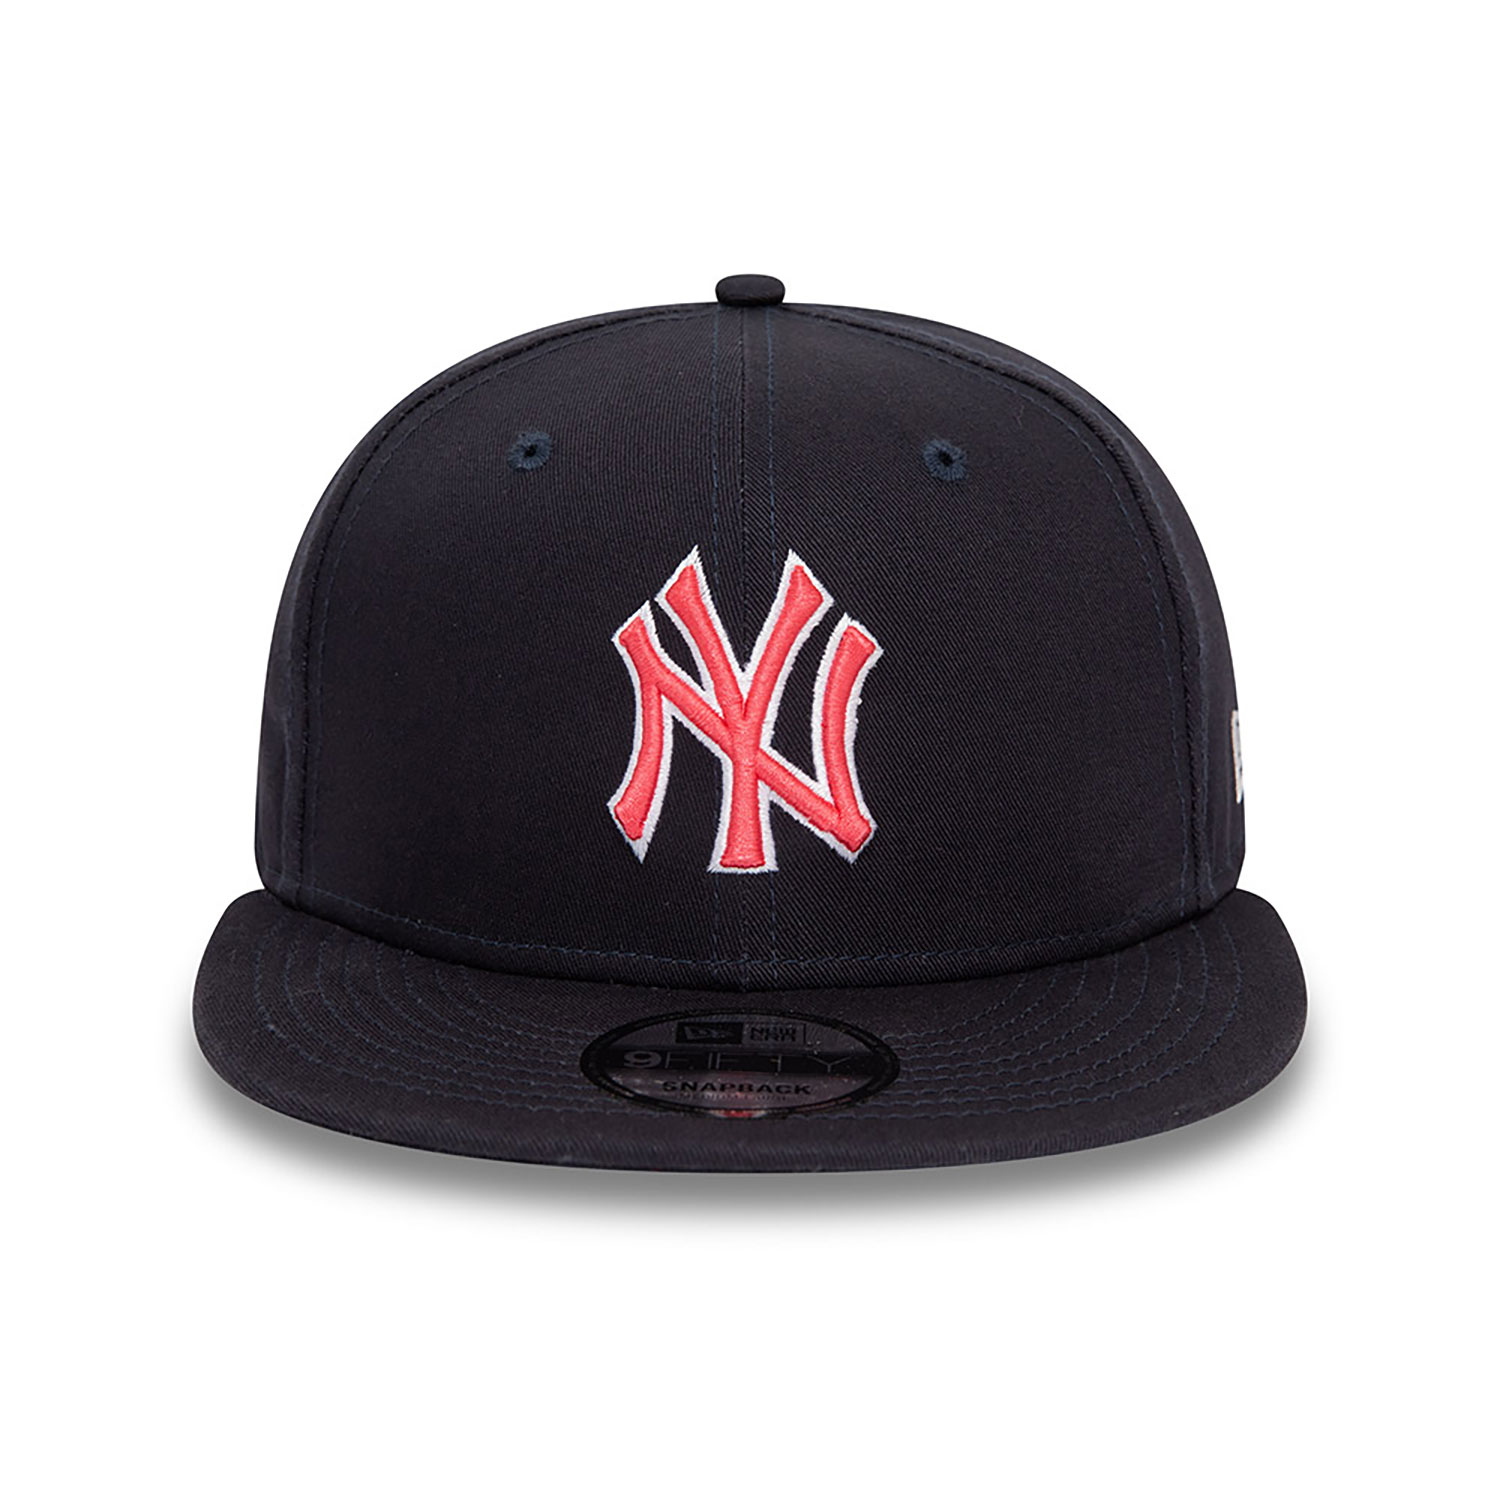 New York Yankees MLB Outline Navy 9FIFTY Adjustable Cap